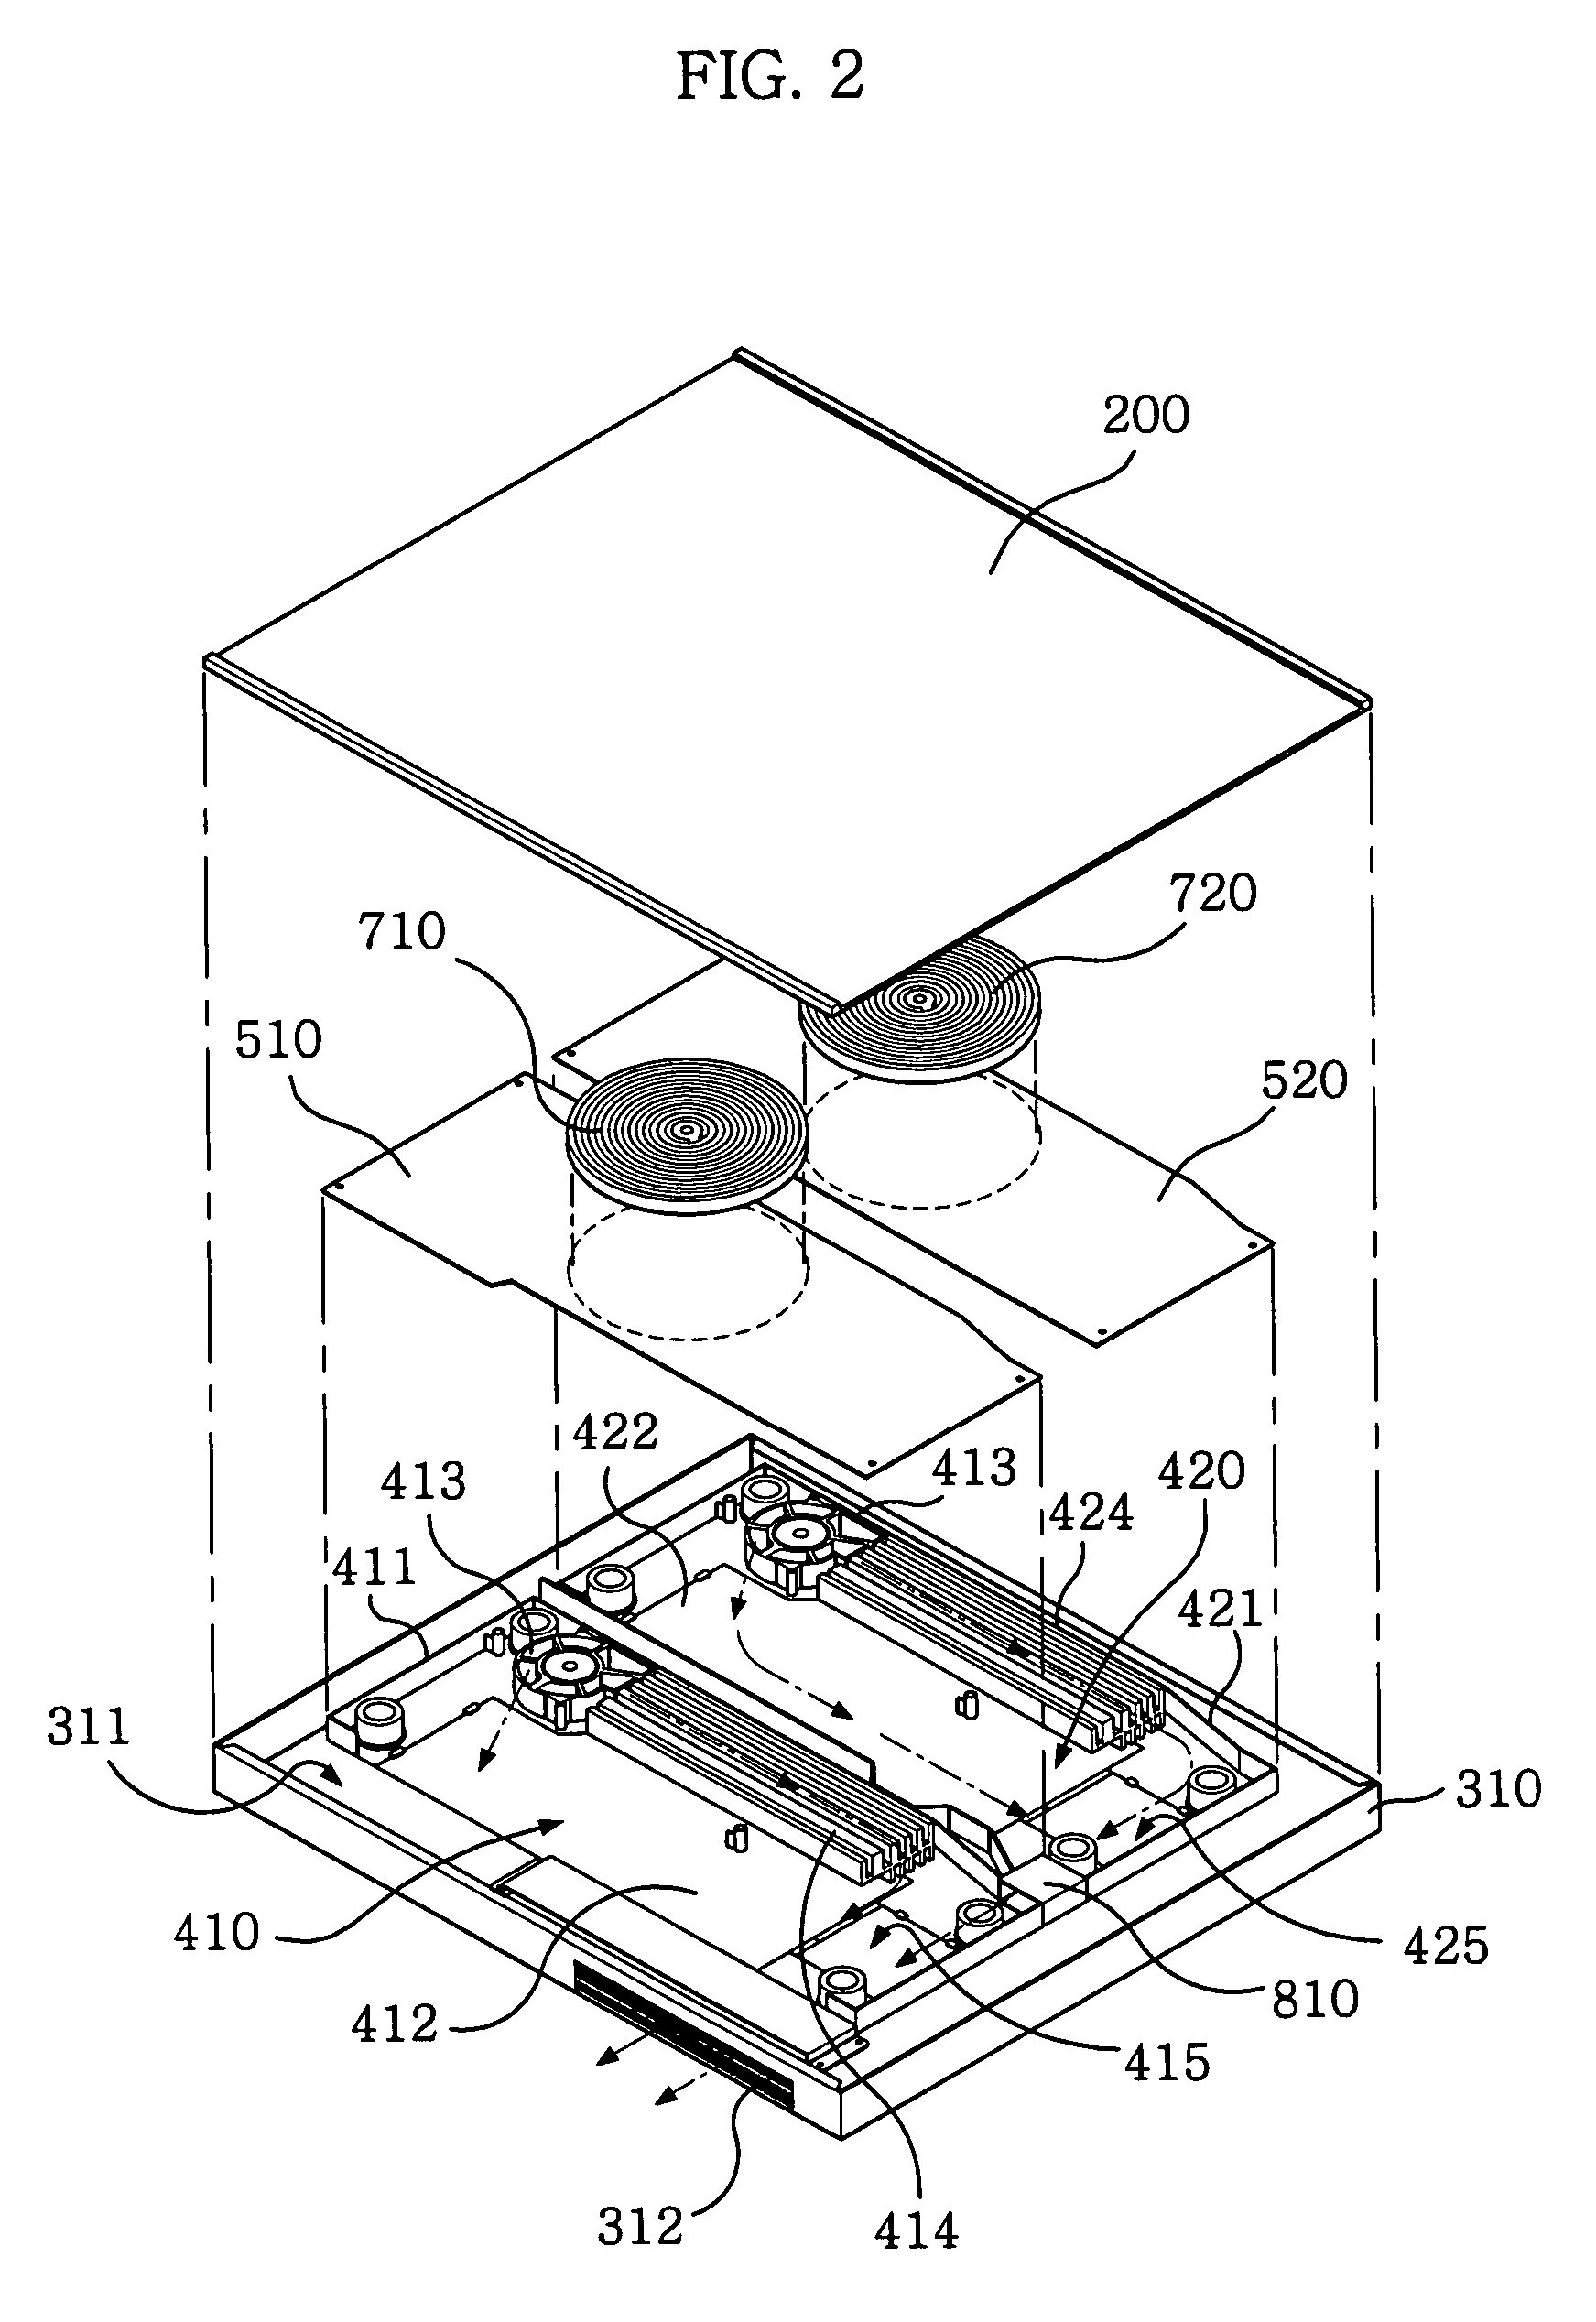 Induction heating cooker with horizontal exhaust passage